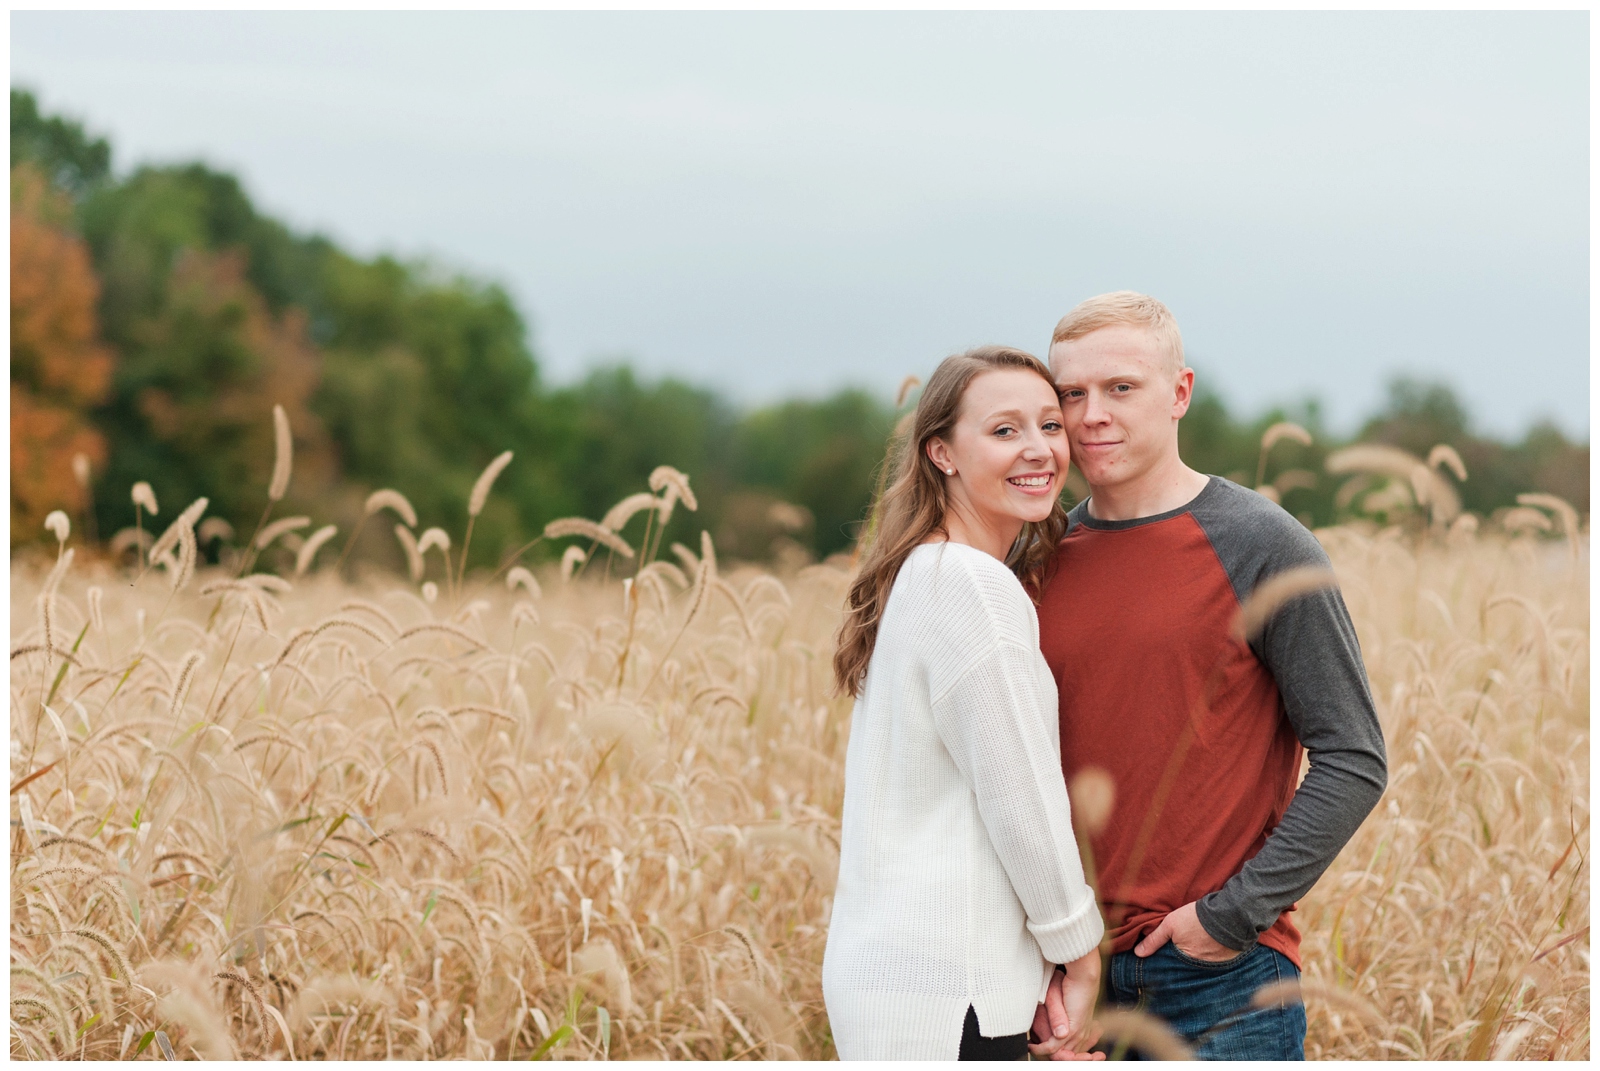 engaged couple looking happily at camera during Country Engagement Session Sunbury Ohio